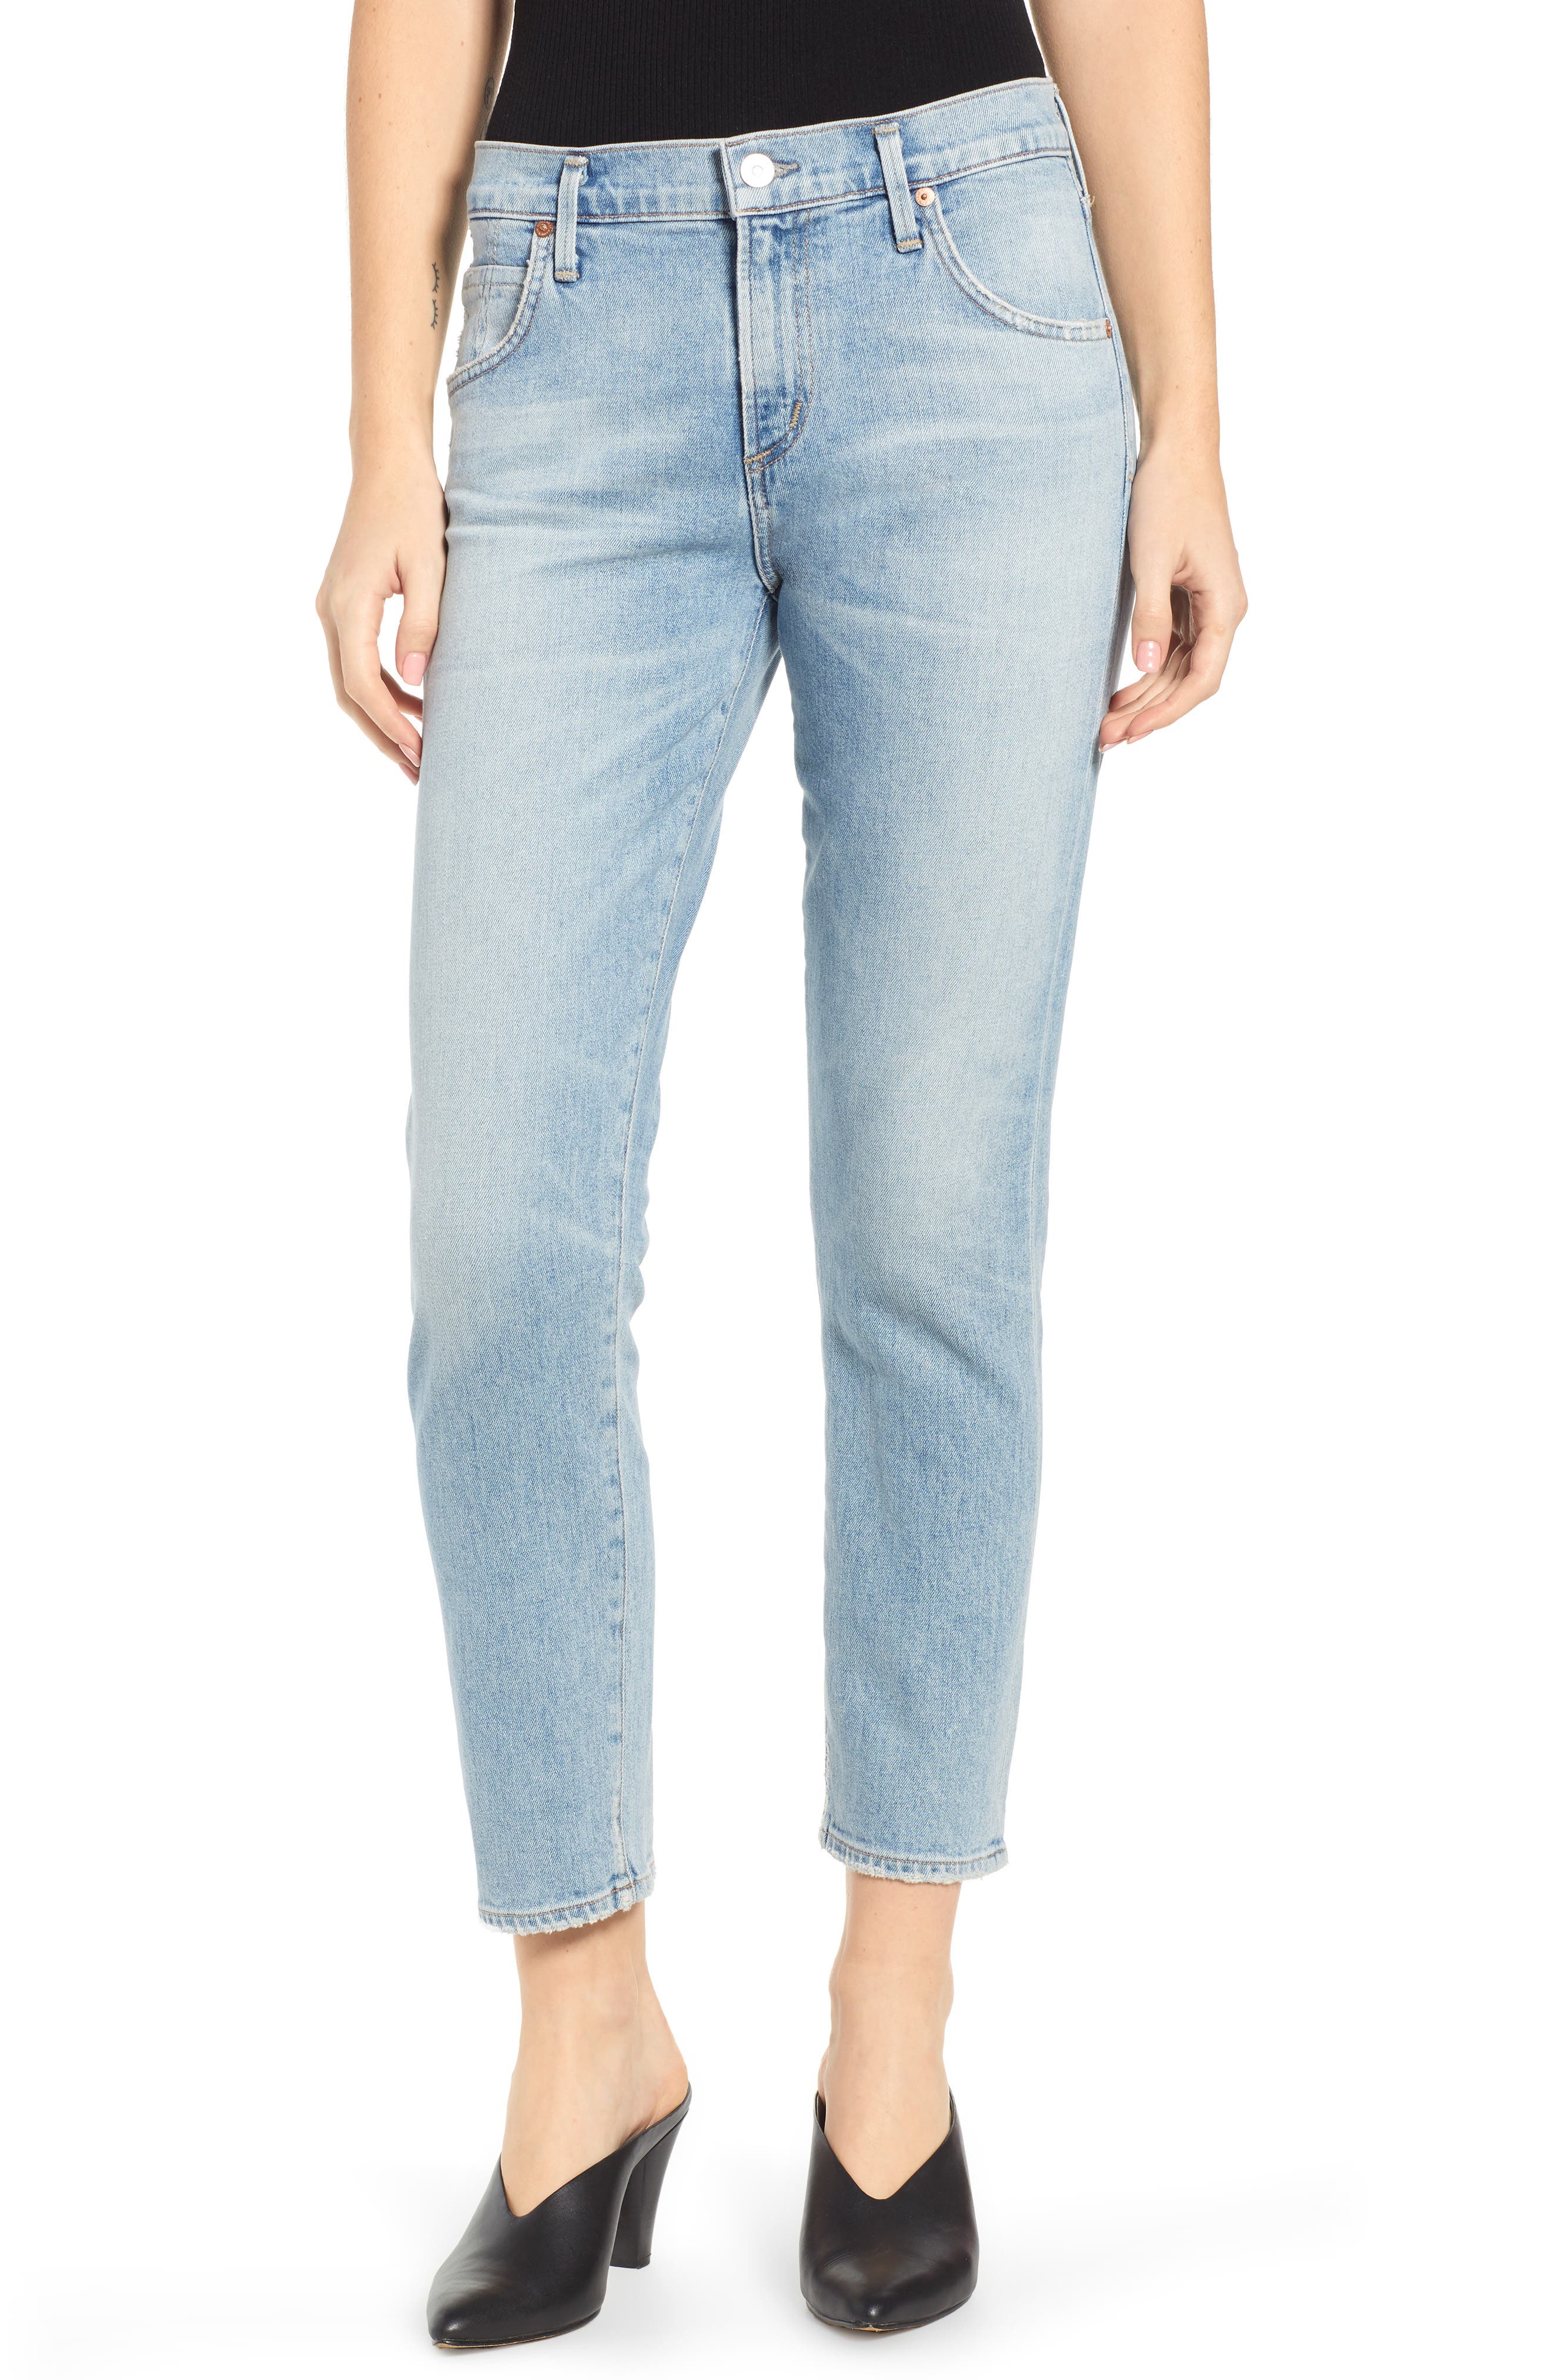 citizens of humanity elsa jeans